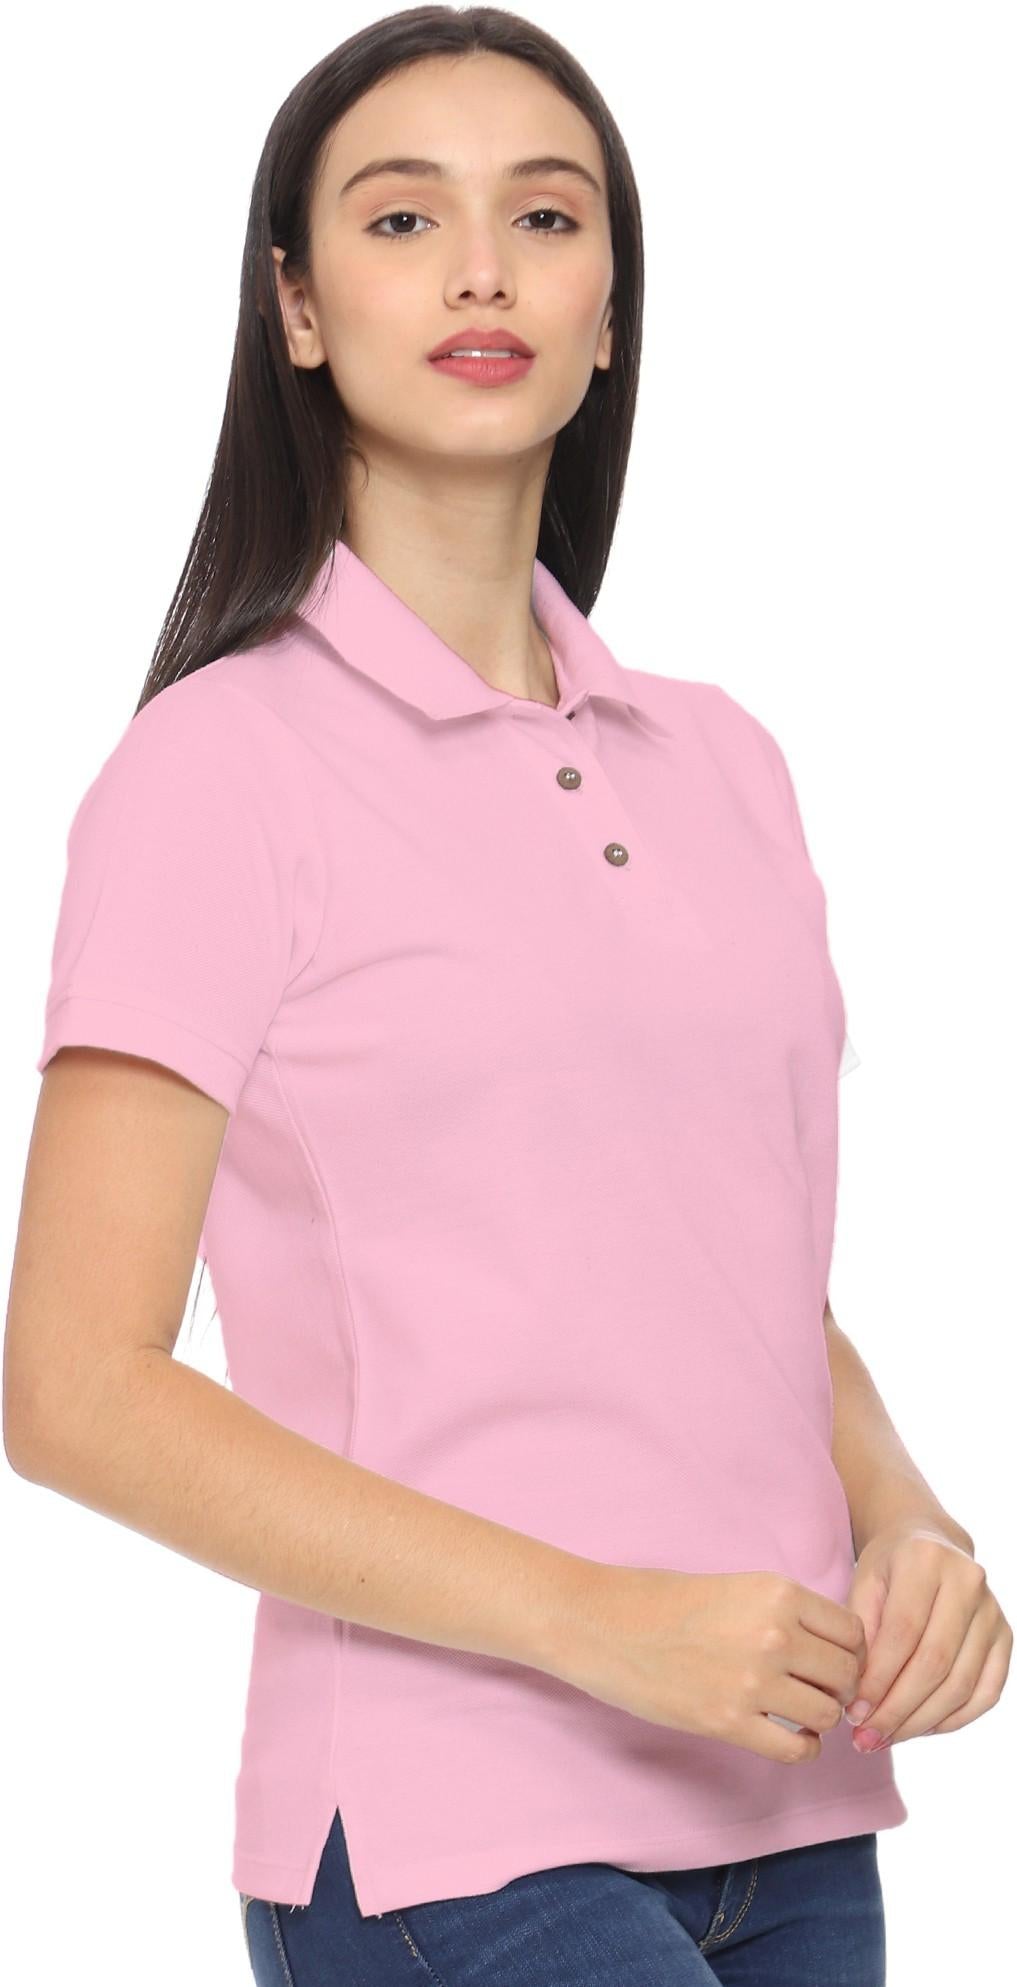 Women's Casual Solid T-shirt